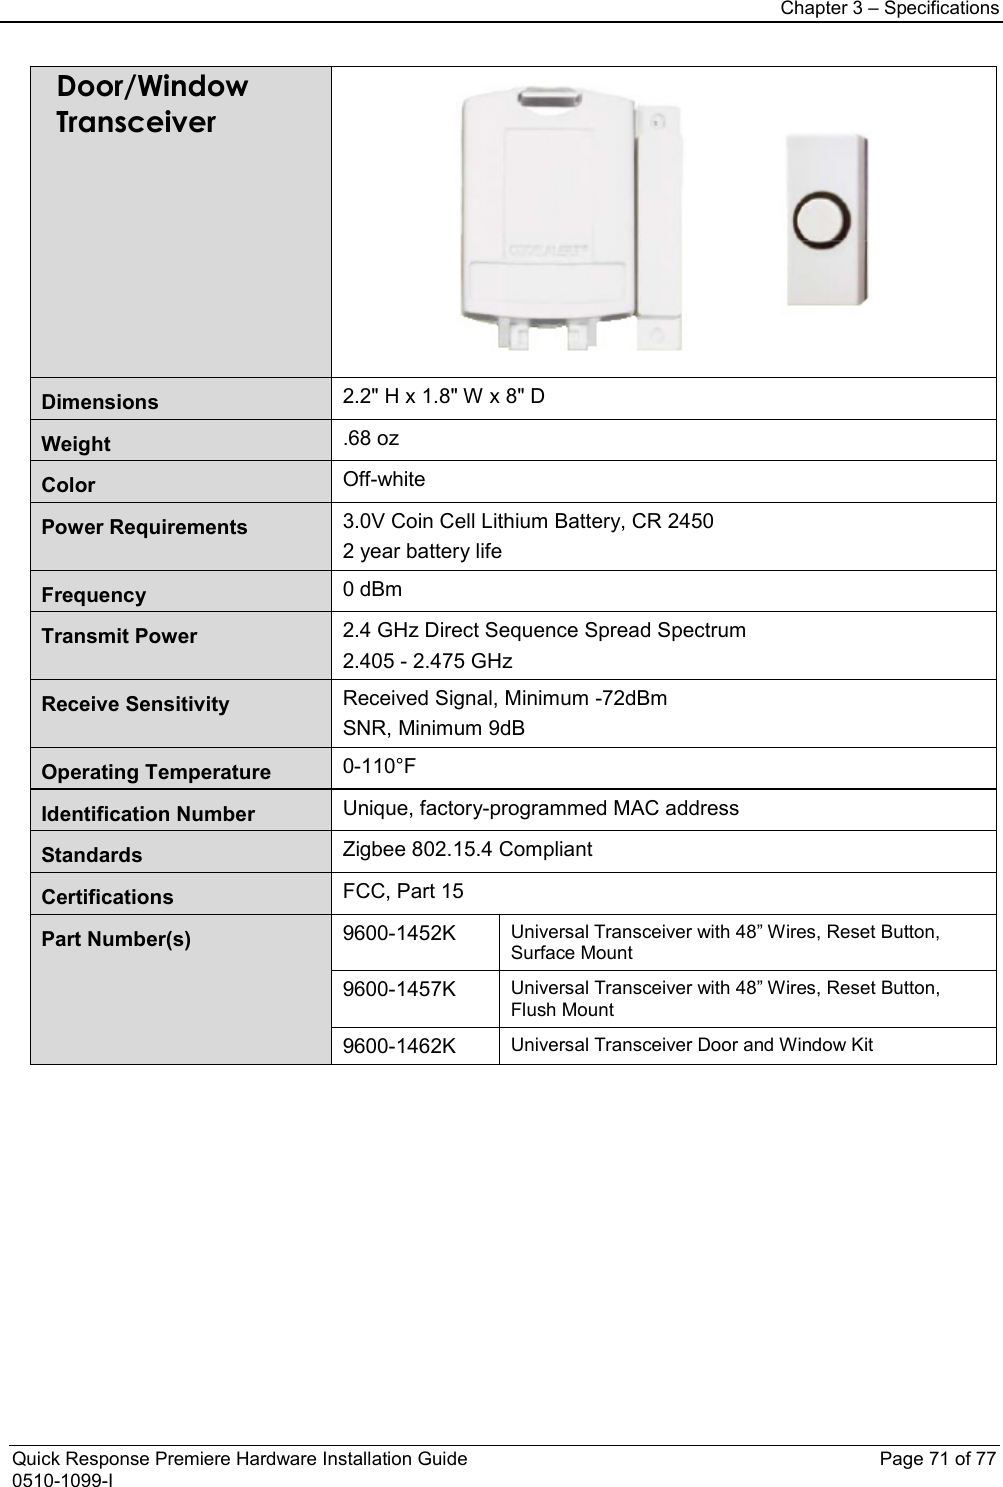 Chapter 3 – Specifications  Quick Response Premiere Hardware Installation Guide    Page 71 of 77 0510-1099-I Door/Window Transceiver  Dimensions 2.2&quot; H x 1.8&quot; W x 8&quot; D Weight .68 oz Color Off-white Power Requirements 3.0V Coin Cell Lithium Battery, CR 2450 2 year battery life Frequency  0 dBm Transmit Power 2.4 GHz Direct Sequence Spread Spectrum 2.405 - 2.475 GHz Receive Sensitivity Received Signal, Minimum -72dBm SNR, Minimum 9dB Operating Temperature 0-110°F Identification Number Unique, factory-programmed MAC address Standards Zigbee 802.15.4 Compliant Certifications FCC, Part 15 Part Number(s)  9600-1452K Universal Transceiver with 48” Wires, Reset Button, Surface Mount 9600-1457K Universal Transceiver with 48” Wires, Reset Button, Flush Mount 9600-1462K Universal Transceiver Door and Window Kit           